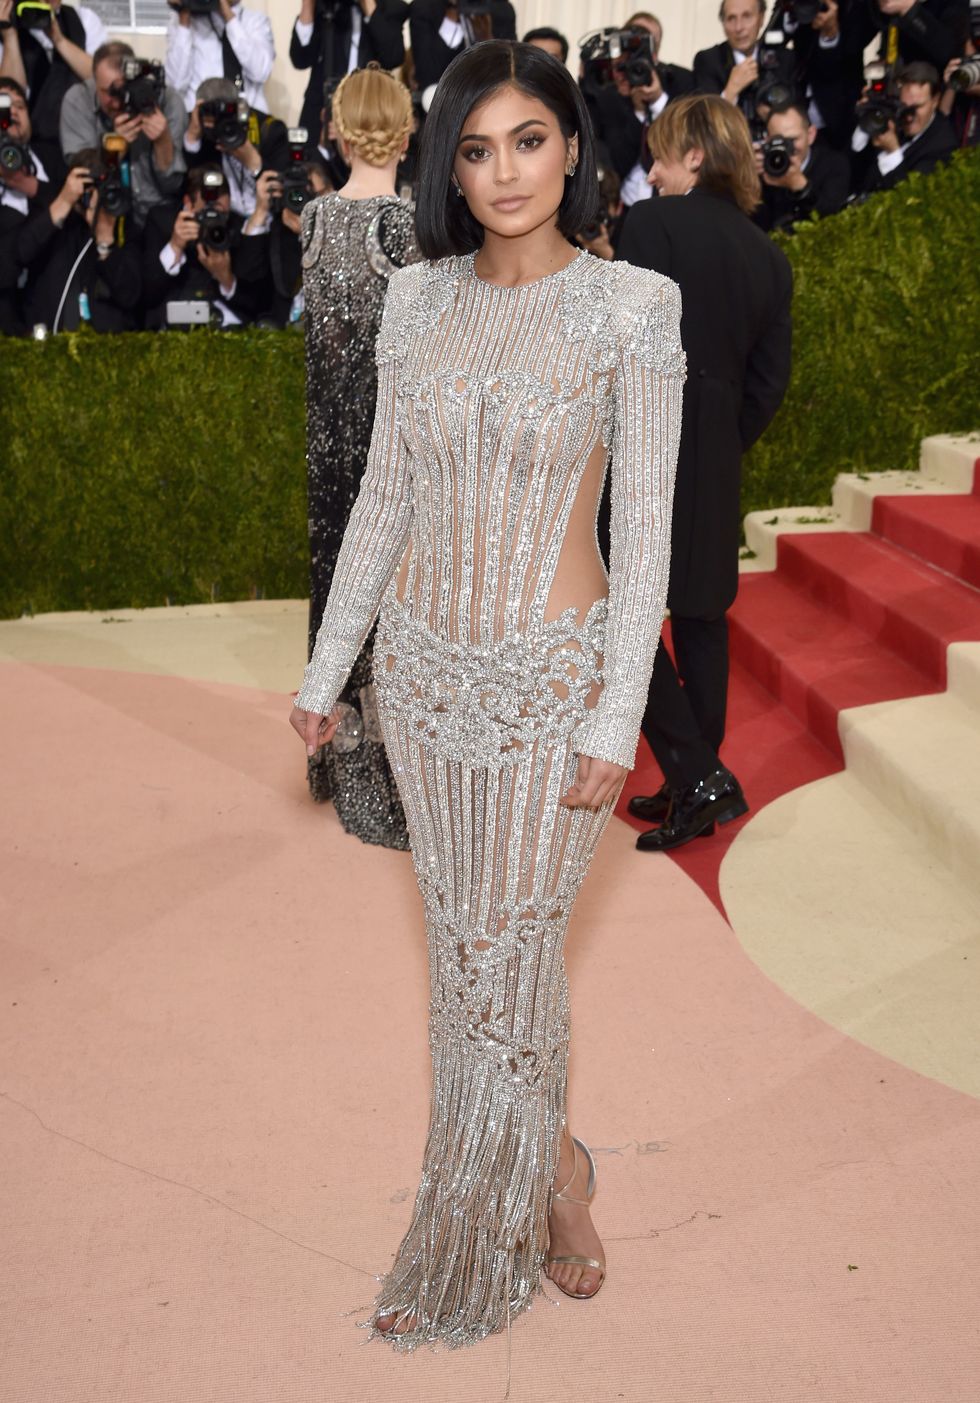 Kylie Jenner In Kim Kardashian-Like Silver Gown At The 2016 Met Gala